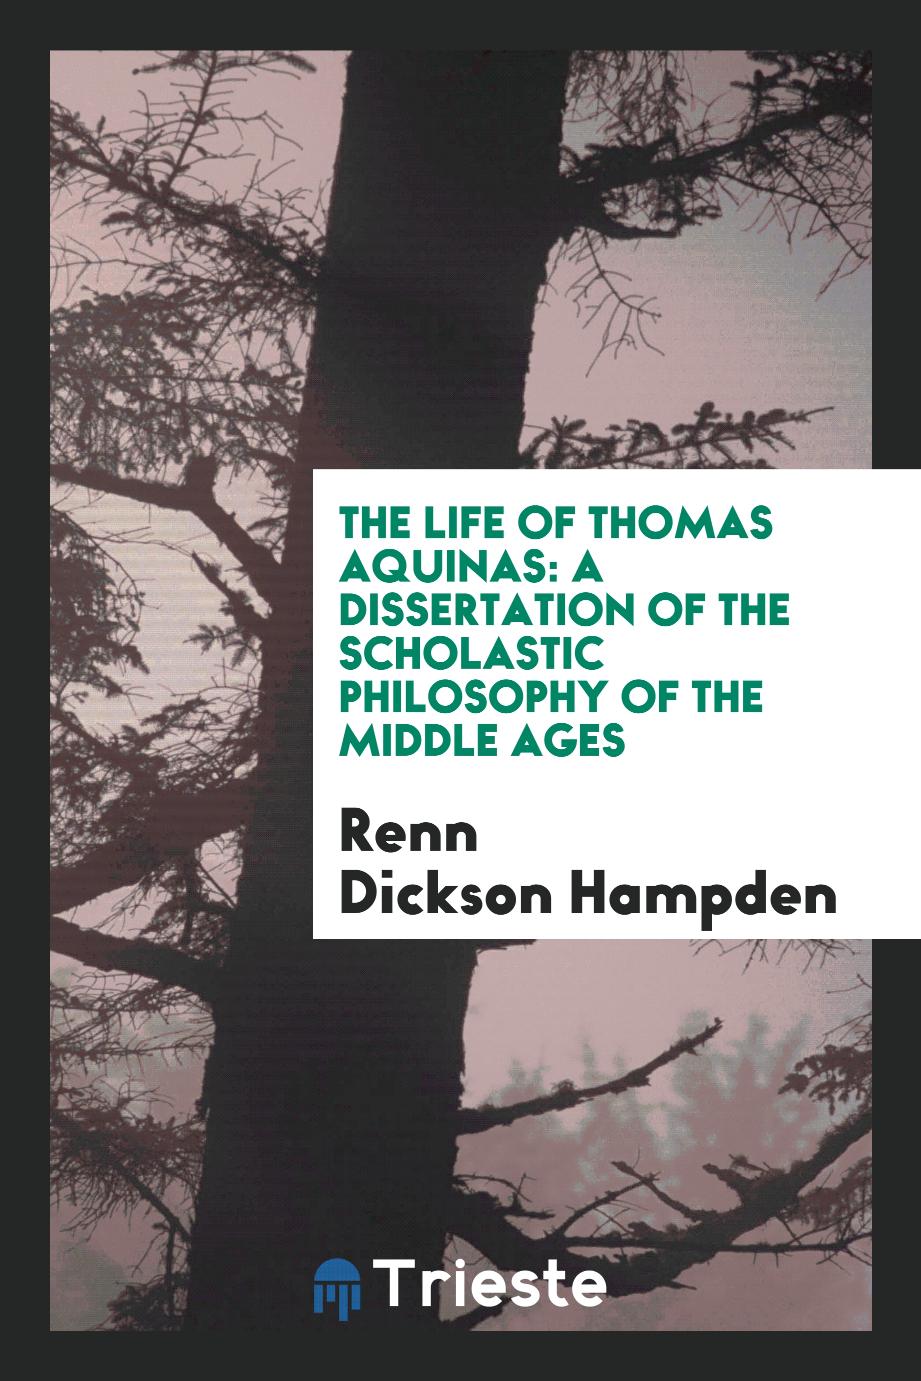 The Life of Thomas Aquinas: A Dissertation of the Scholastic Philosophy of the Middle Ages